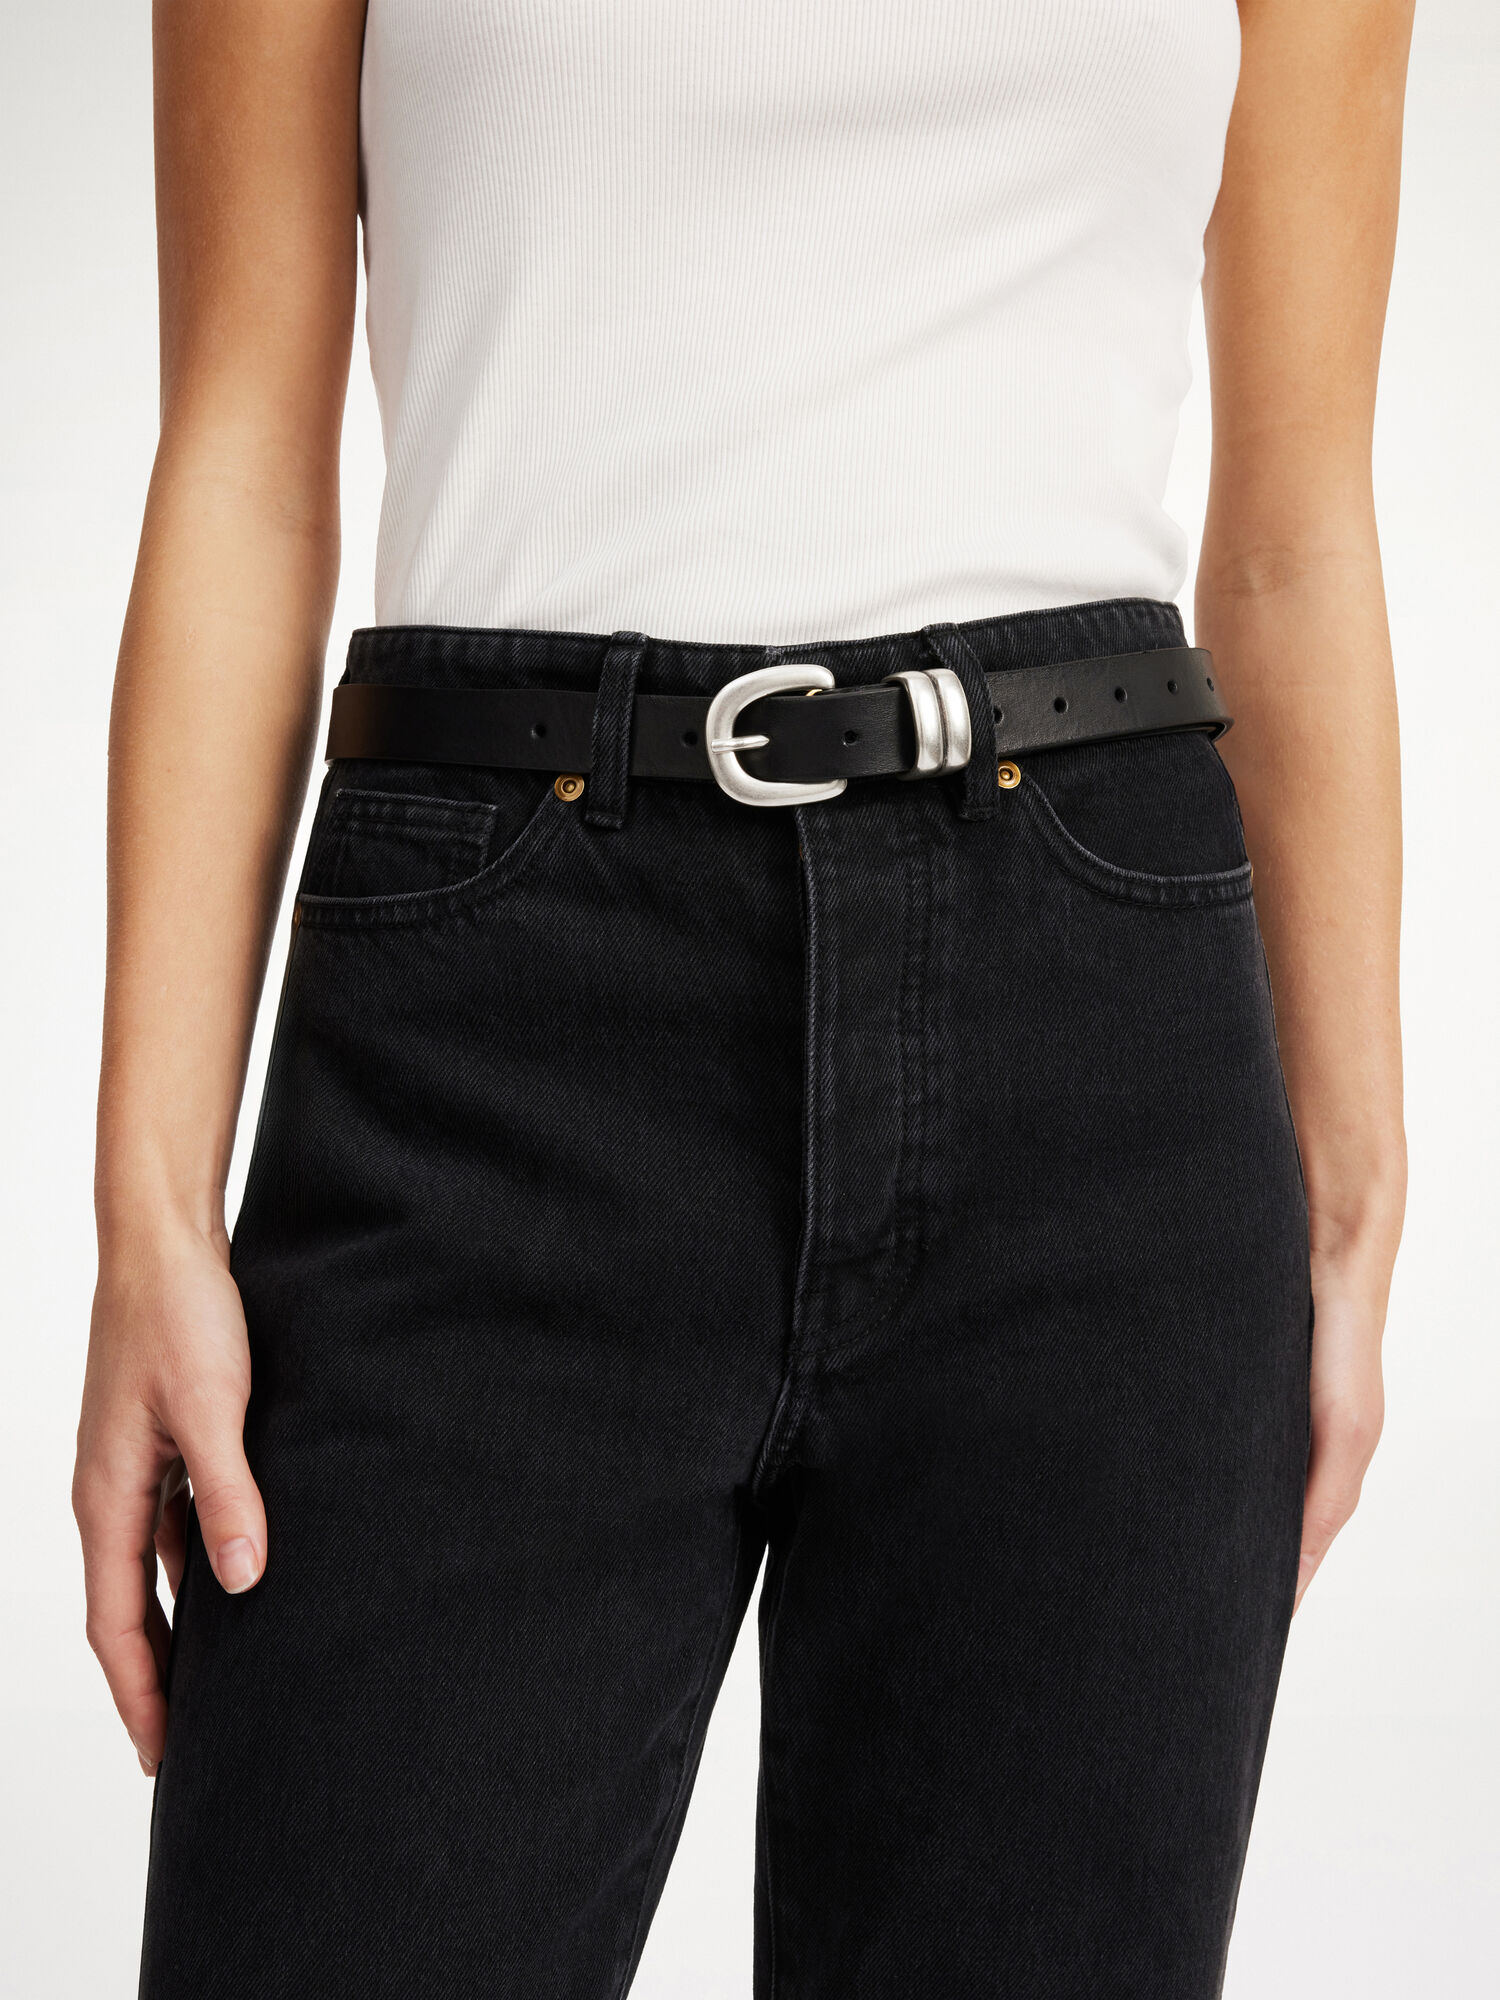 Zoilo leather belt